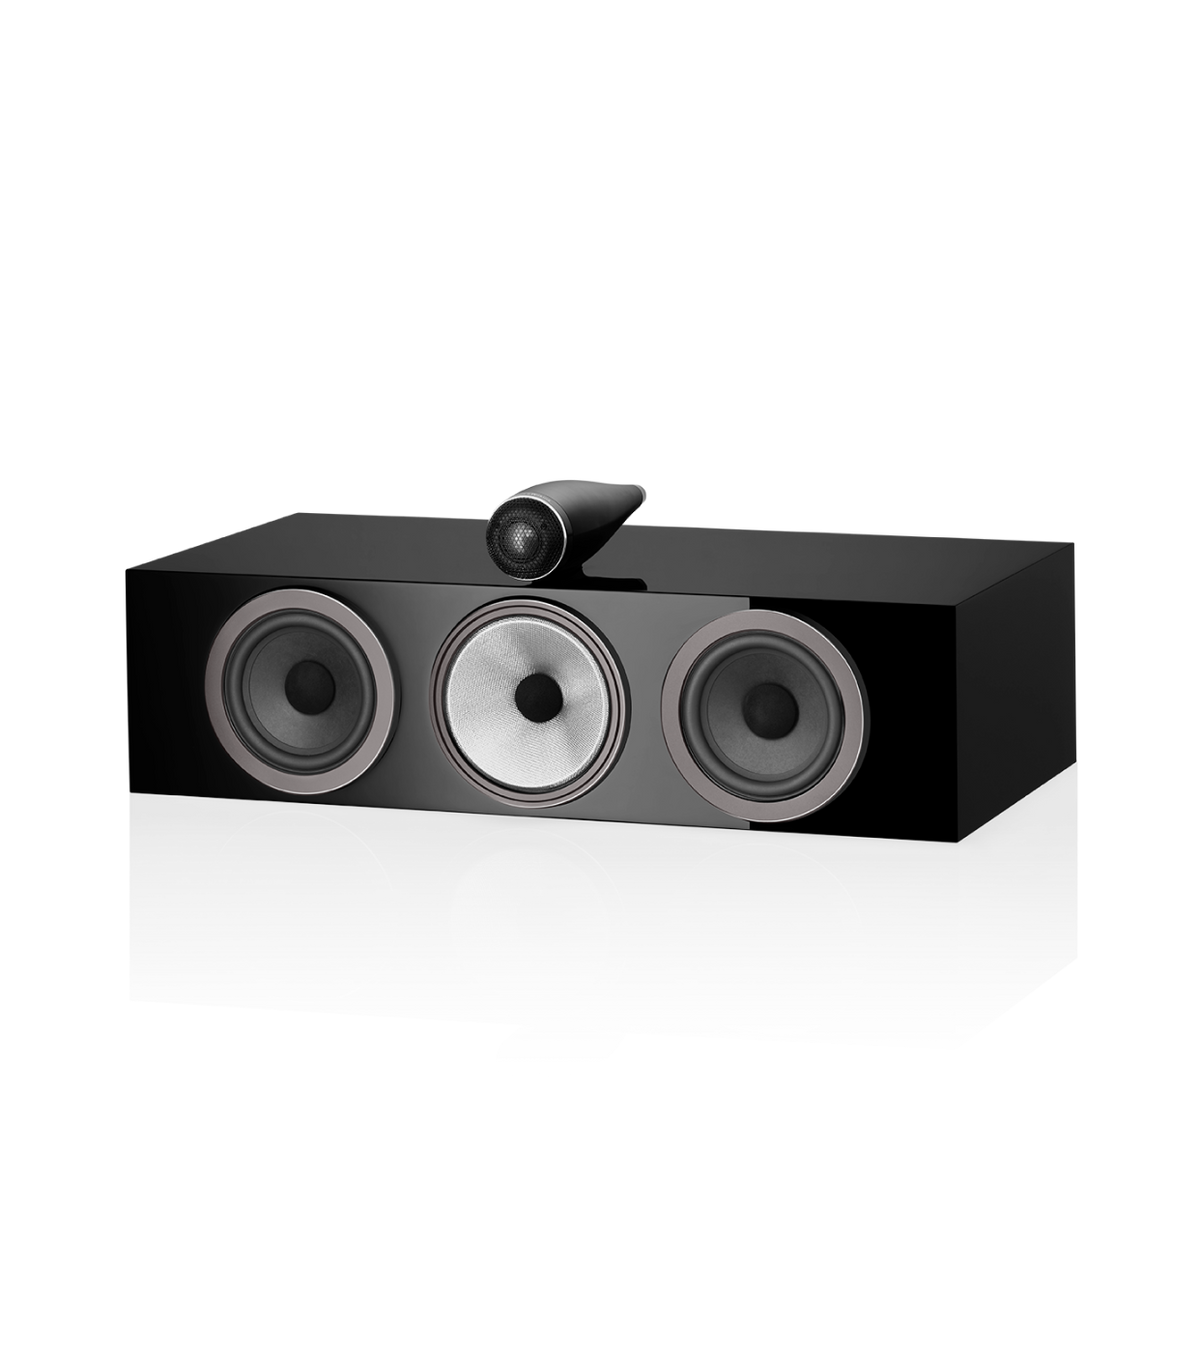 Bowers &amp; Wilkins HTM71 S3